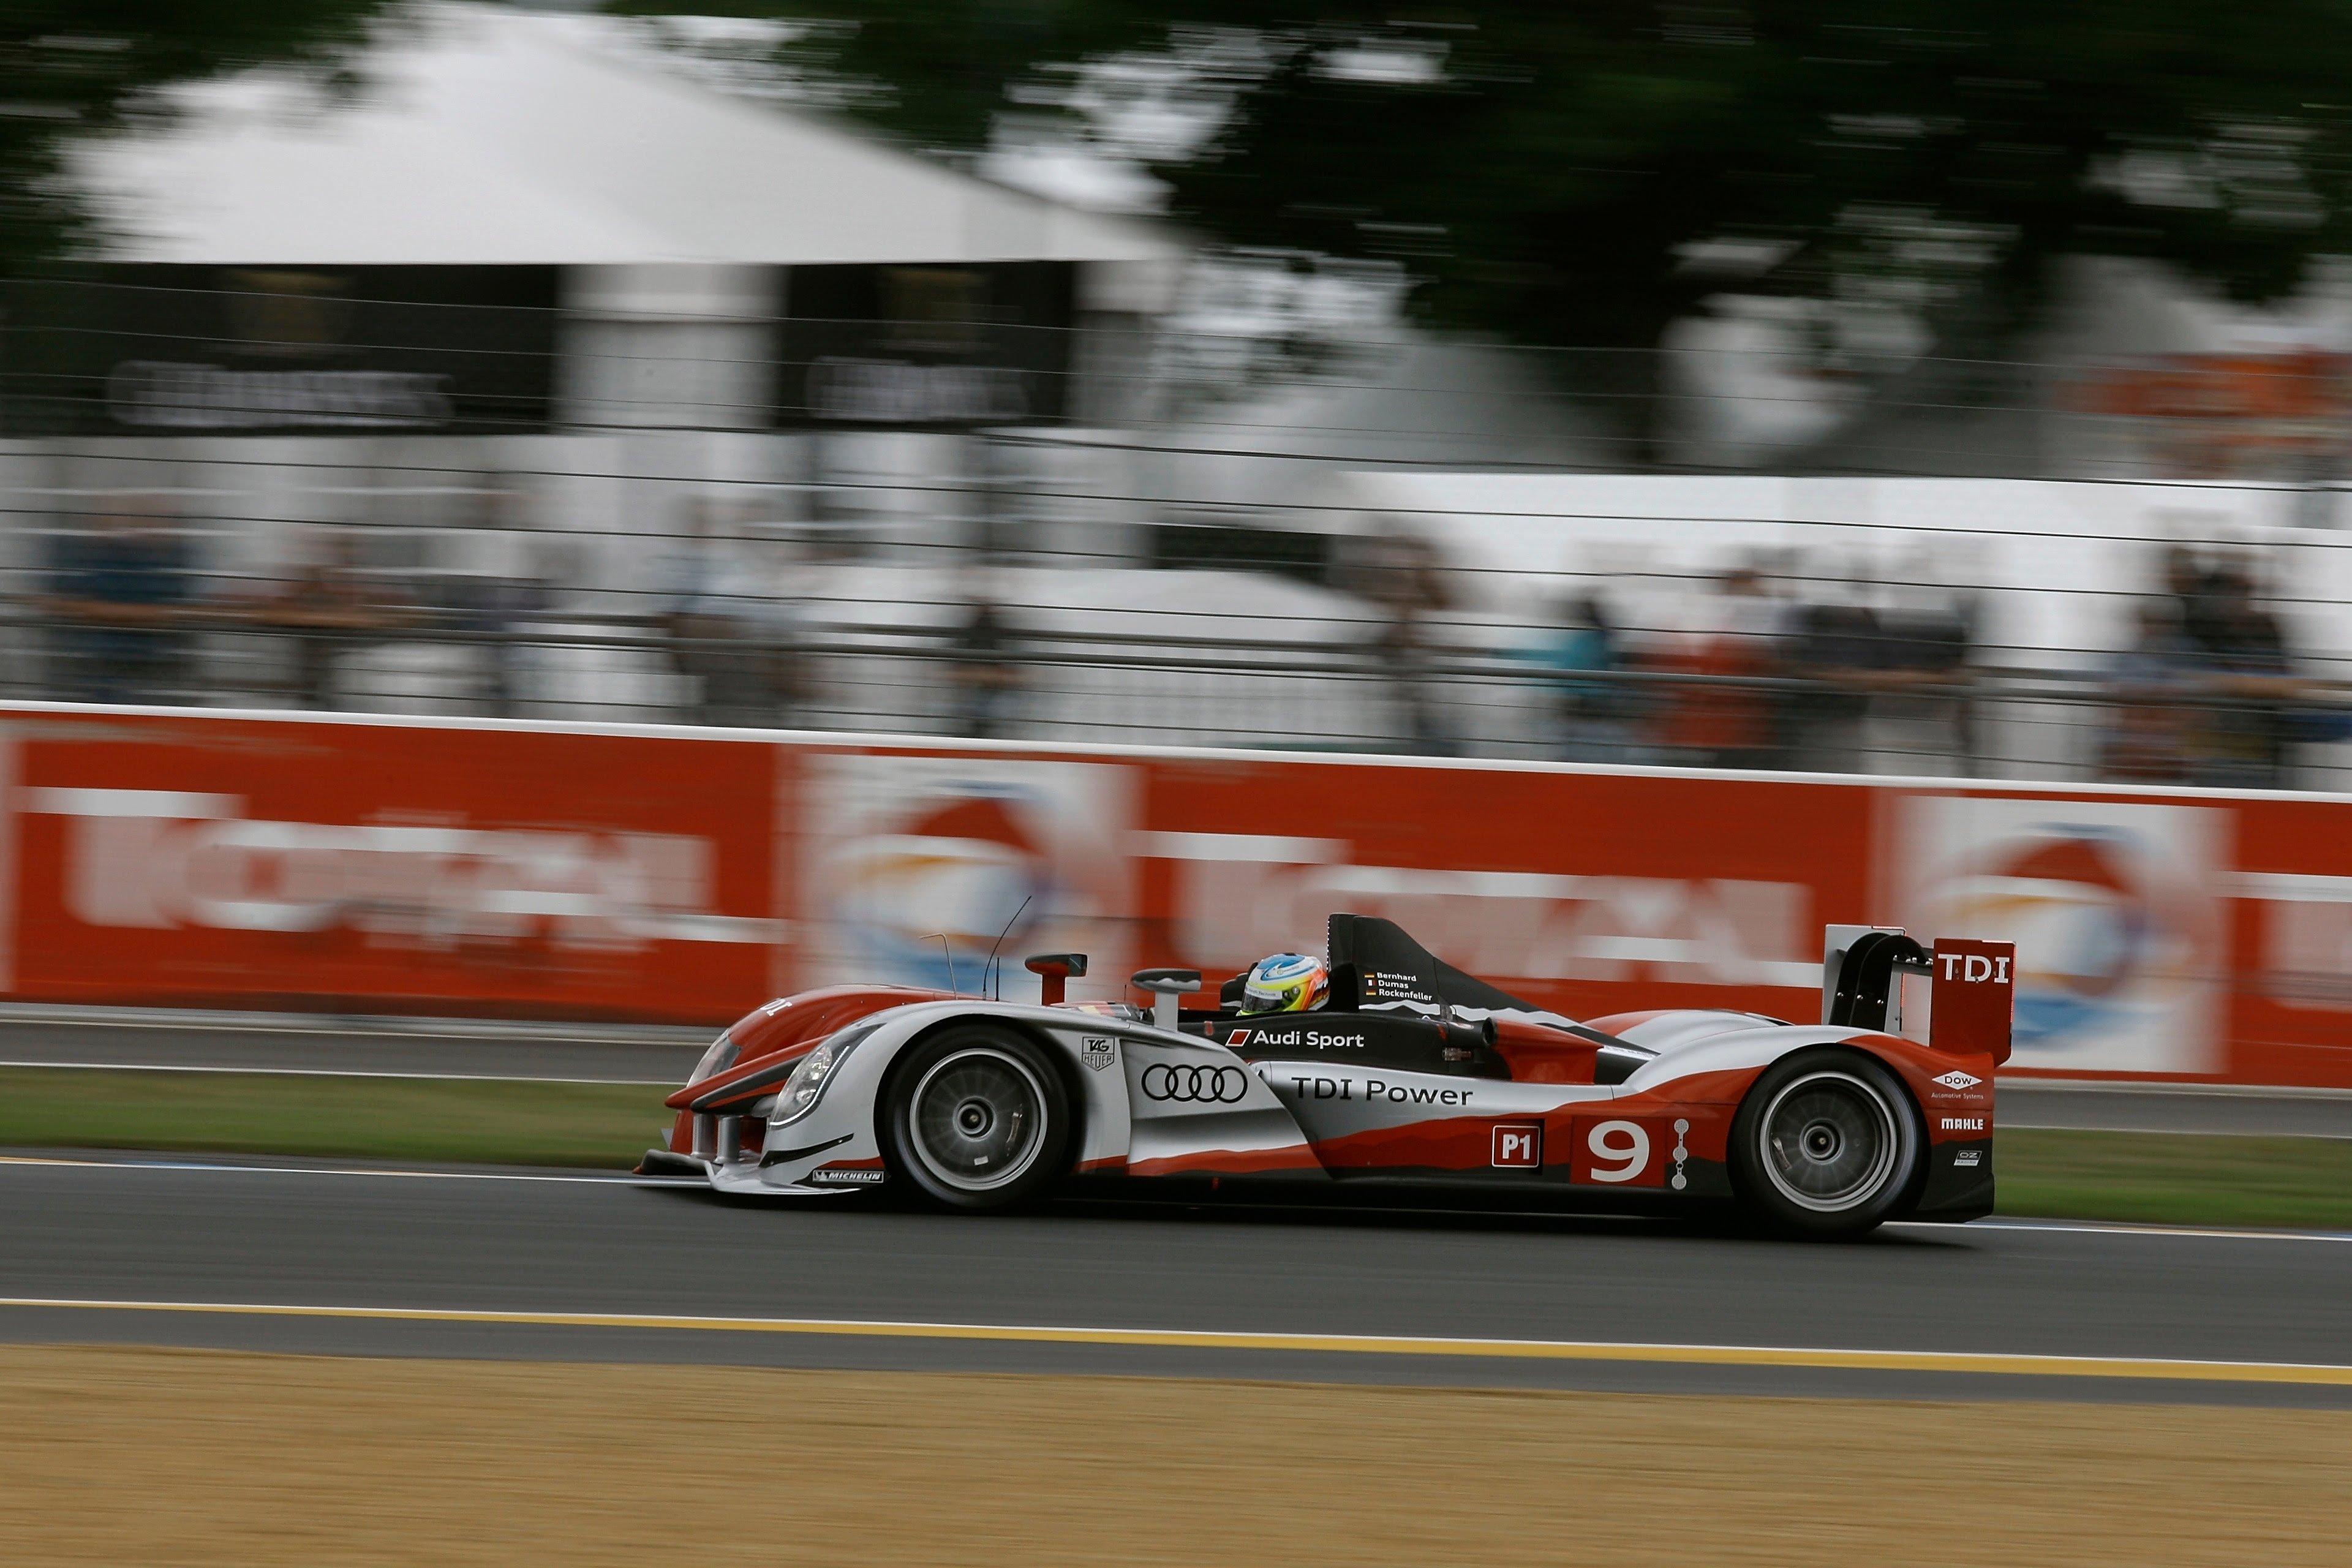 100 years of Le Mans. Harder, faster and more passionate than ever